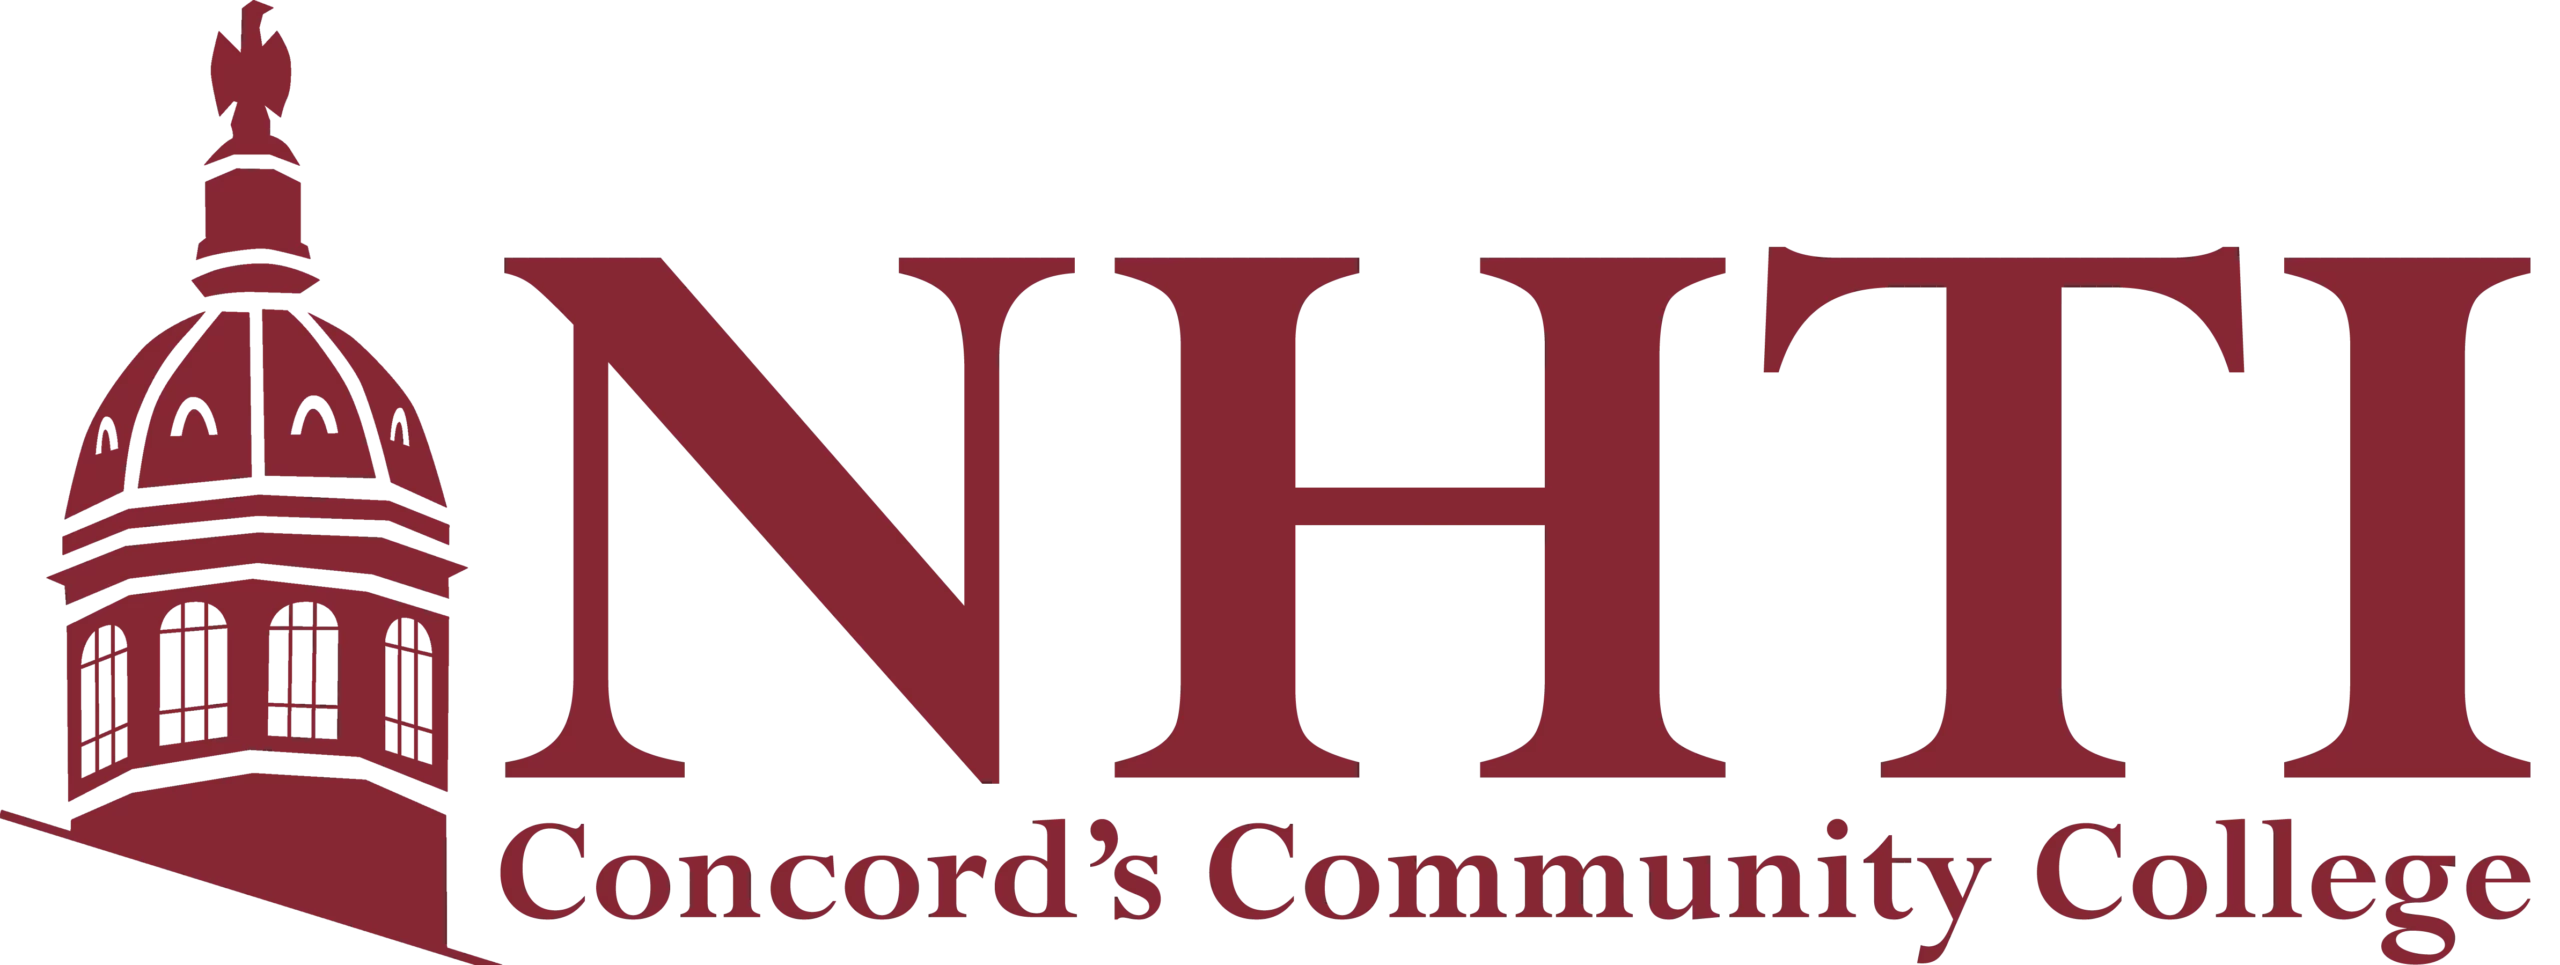 NHTI - Concord's Community College - New England Commission Higher Education